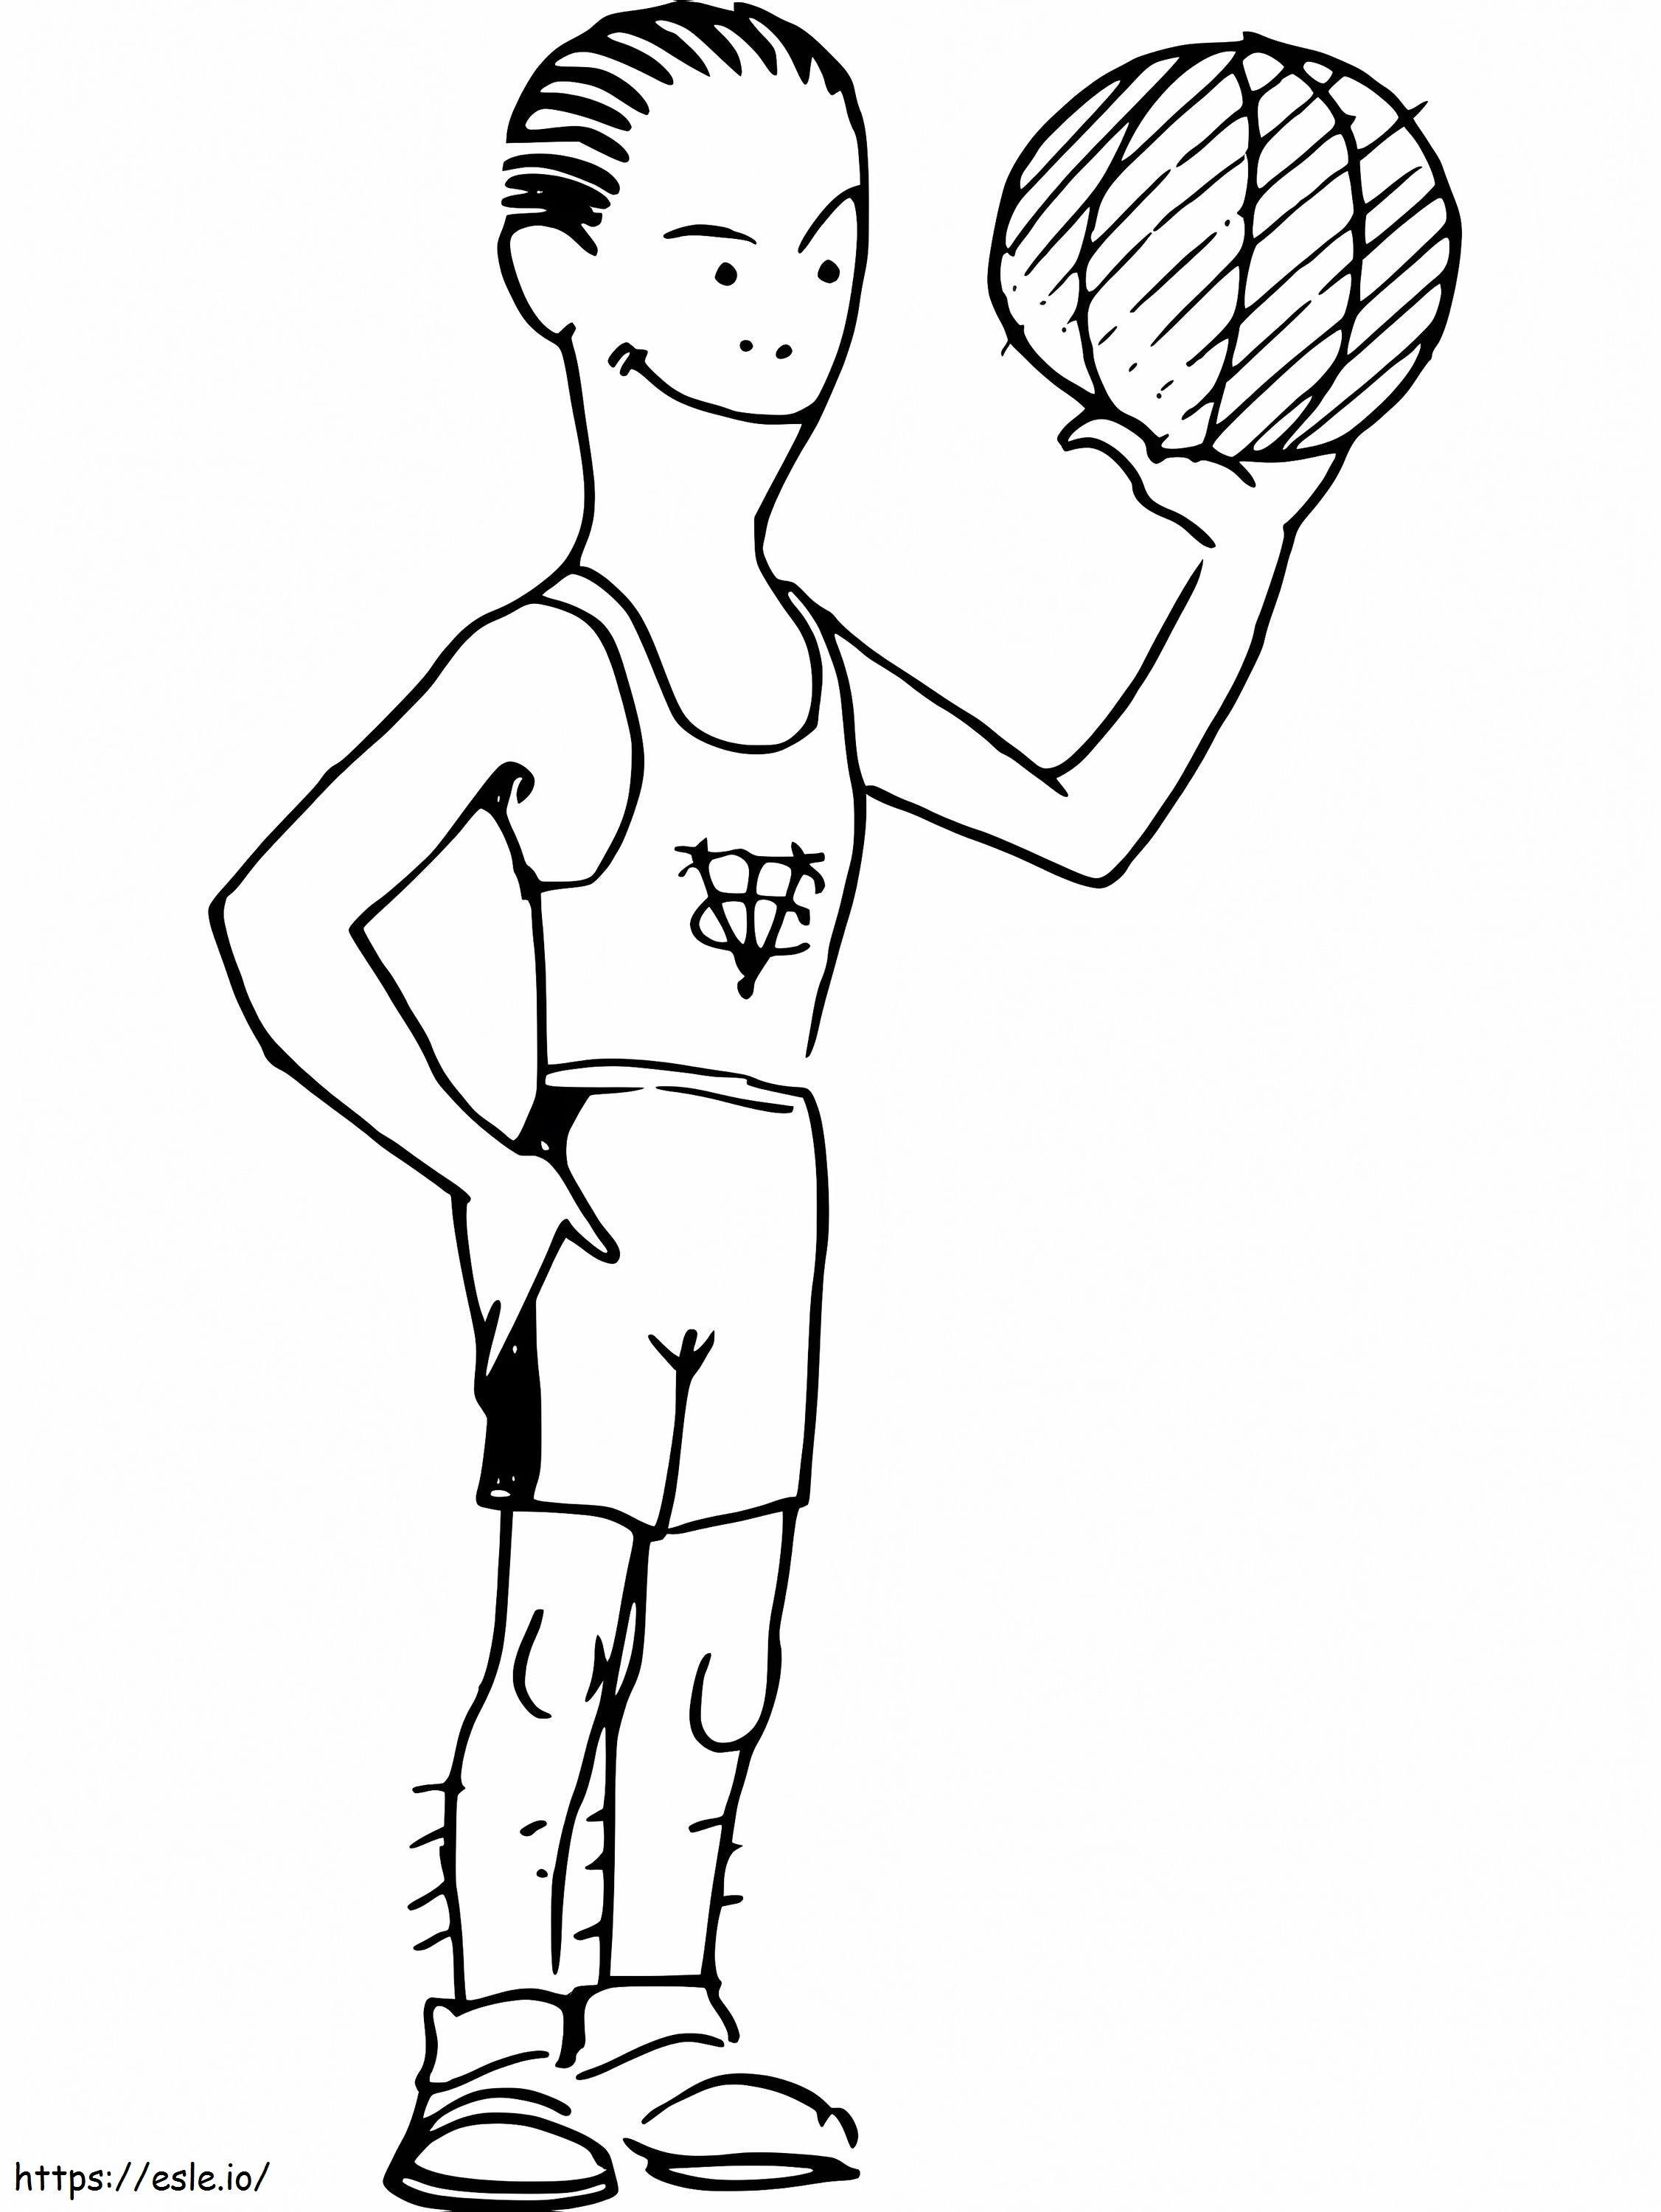 Vintage Basketball Player coloring page